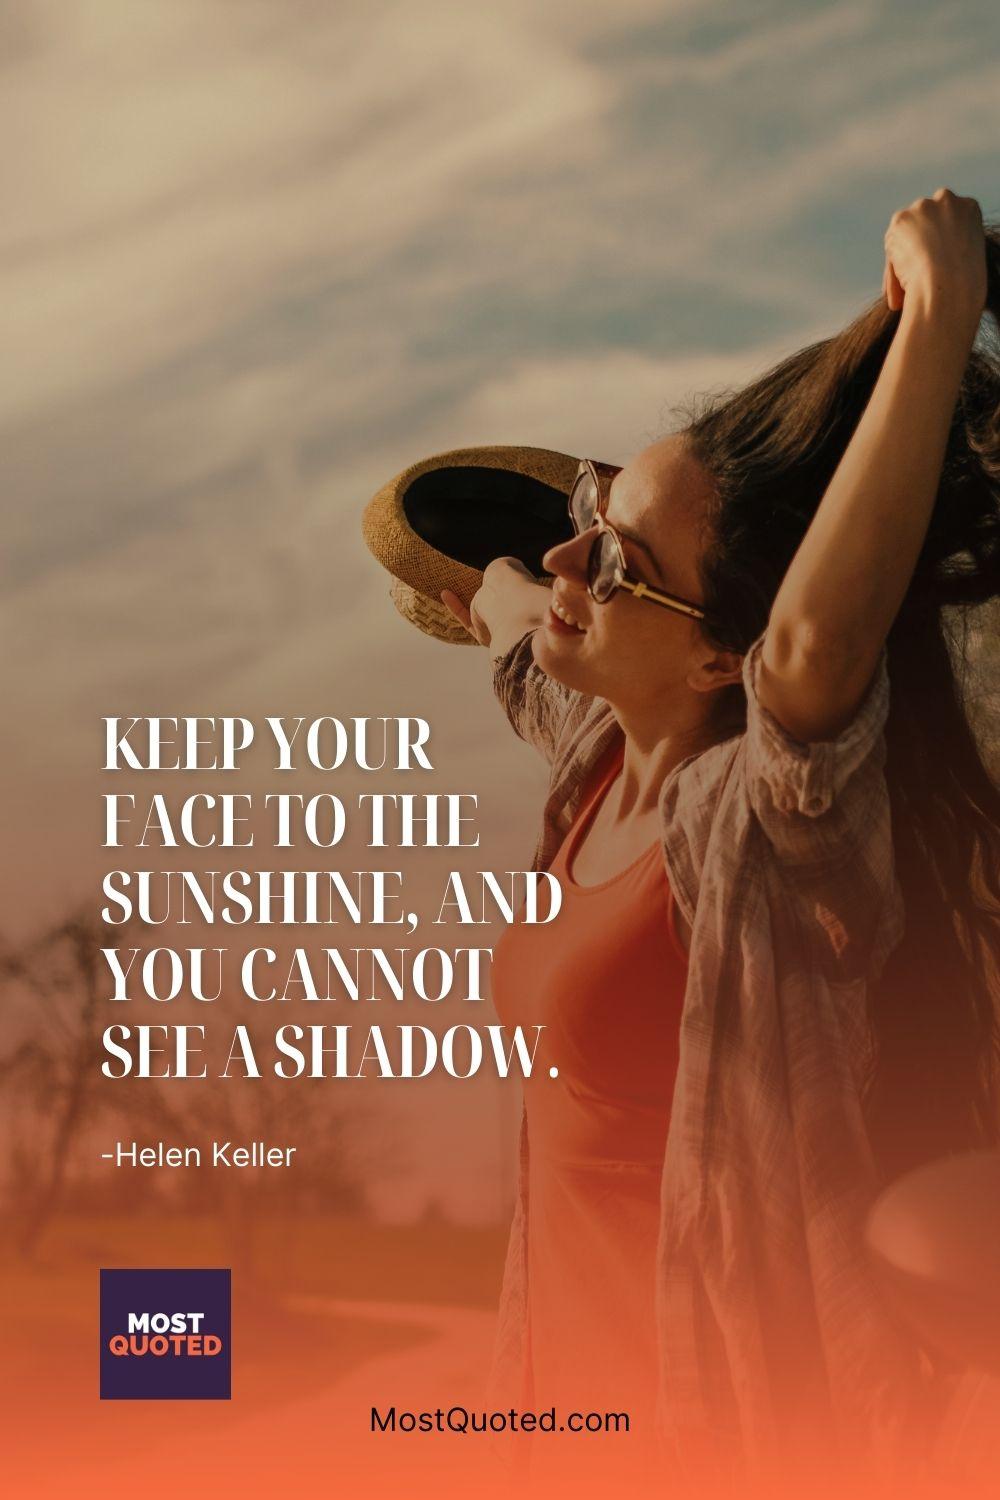 Keep your face to the sunshine, and you cannot see a shadow. - Helen Keller